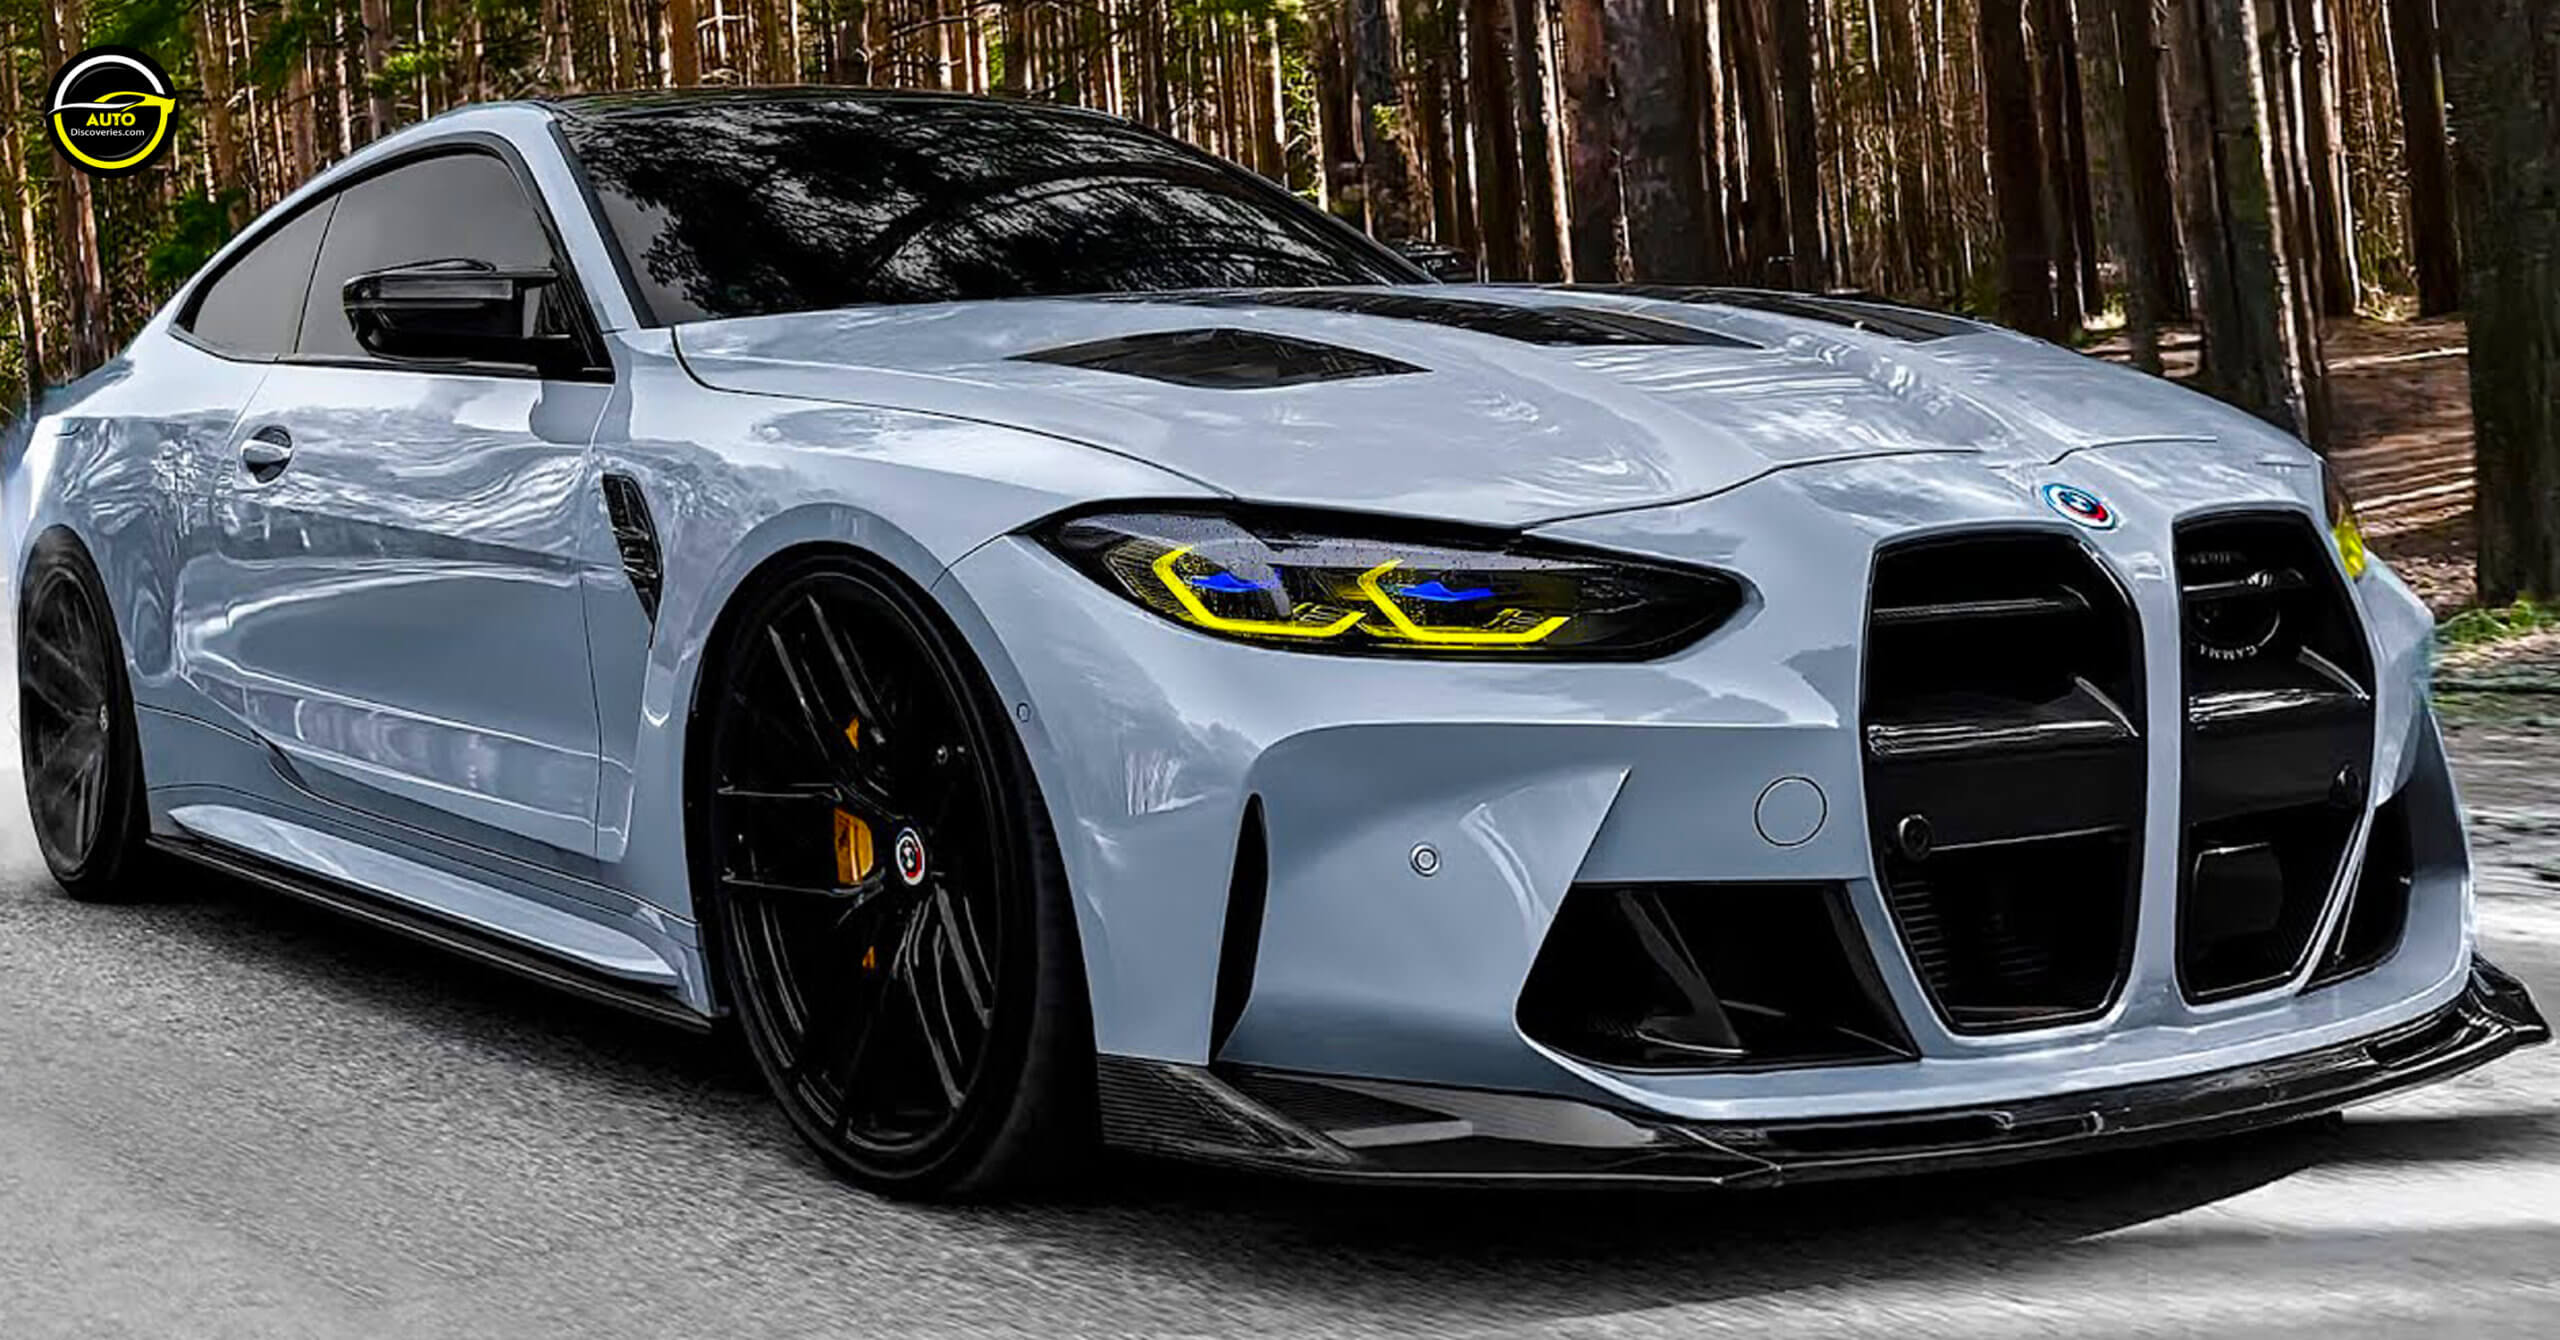 Akrapovic BMW M4 R750 New Ultra M4 From Ramon Performance scaled